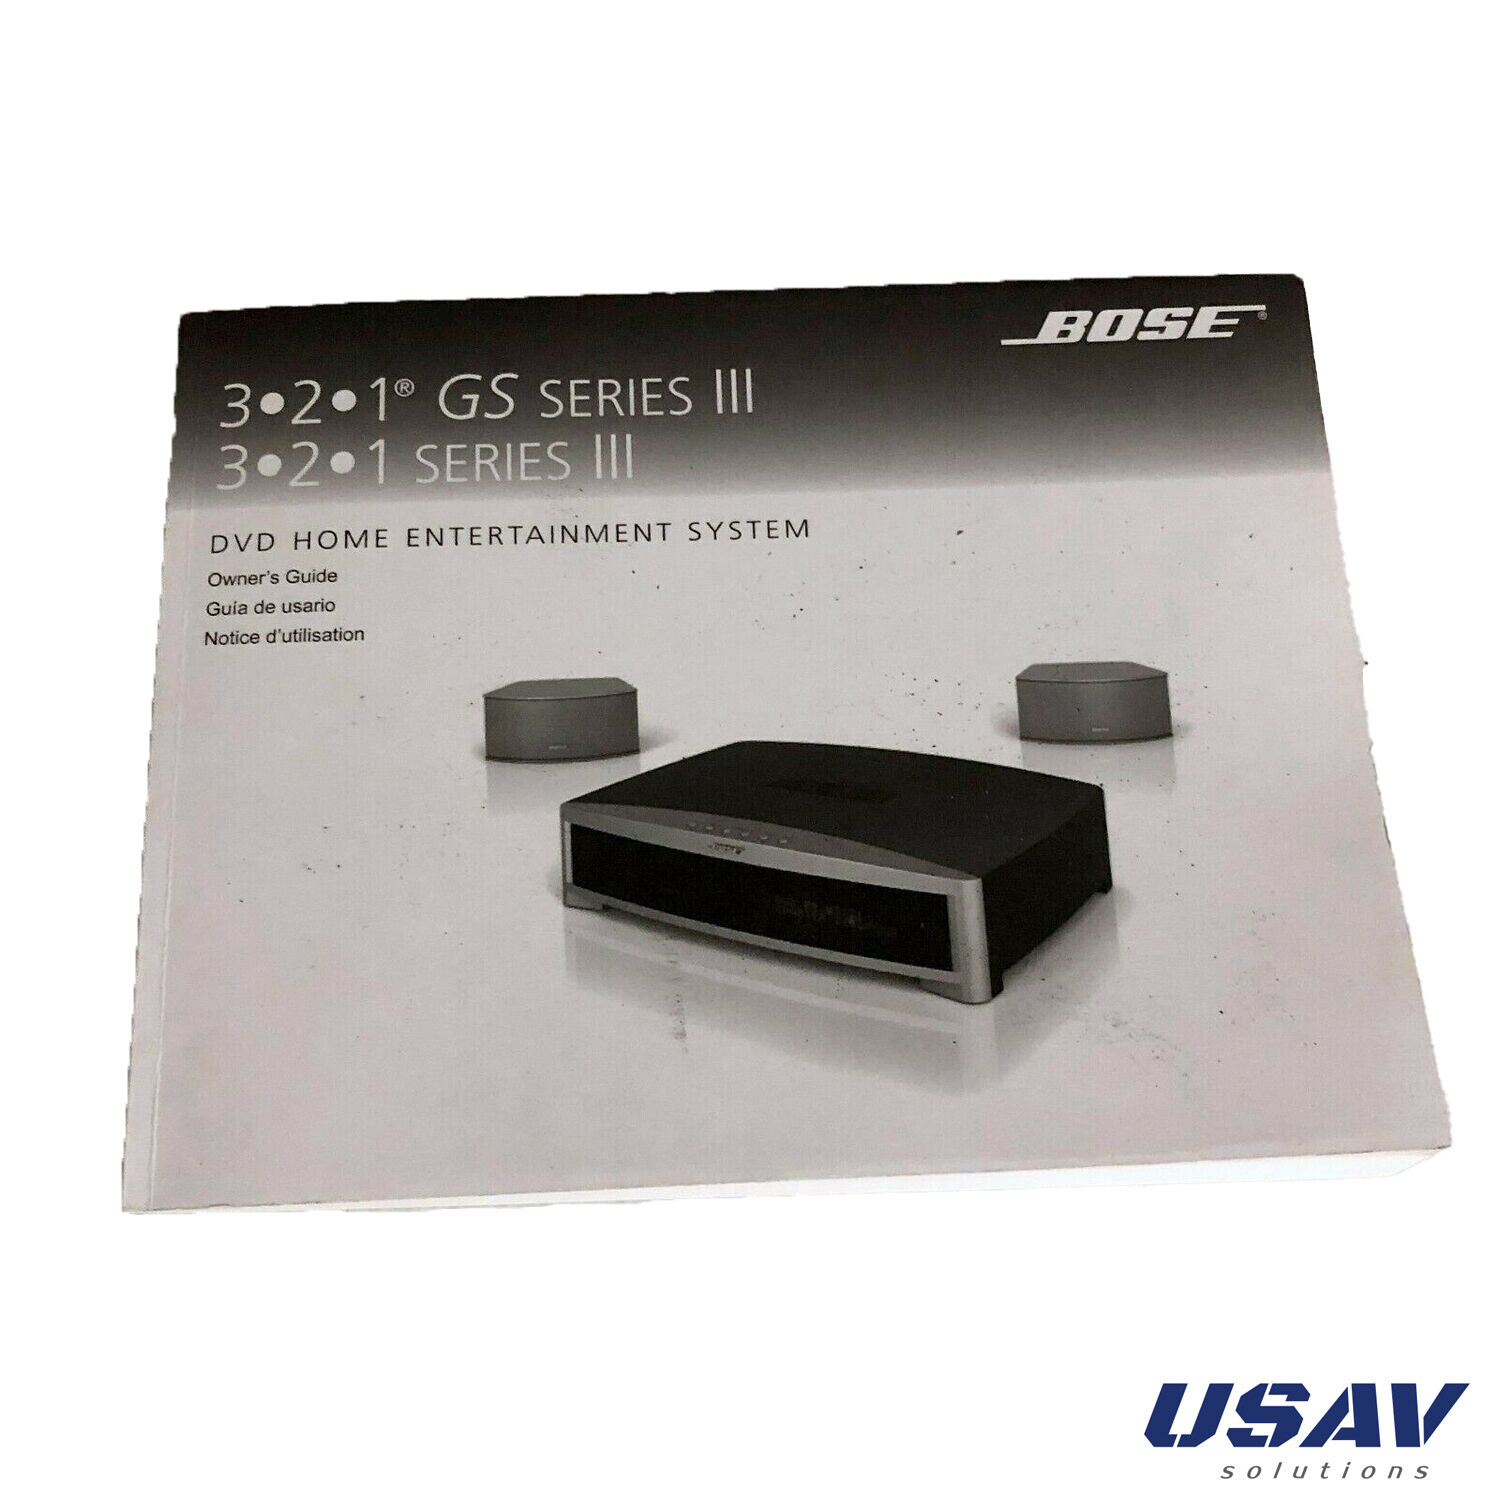 Bose 3.2.1 GS Series III Owners User Manual Guide (Photocopy)